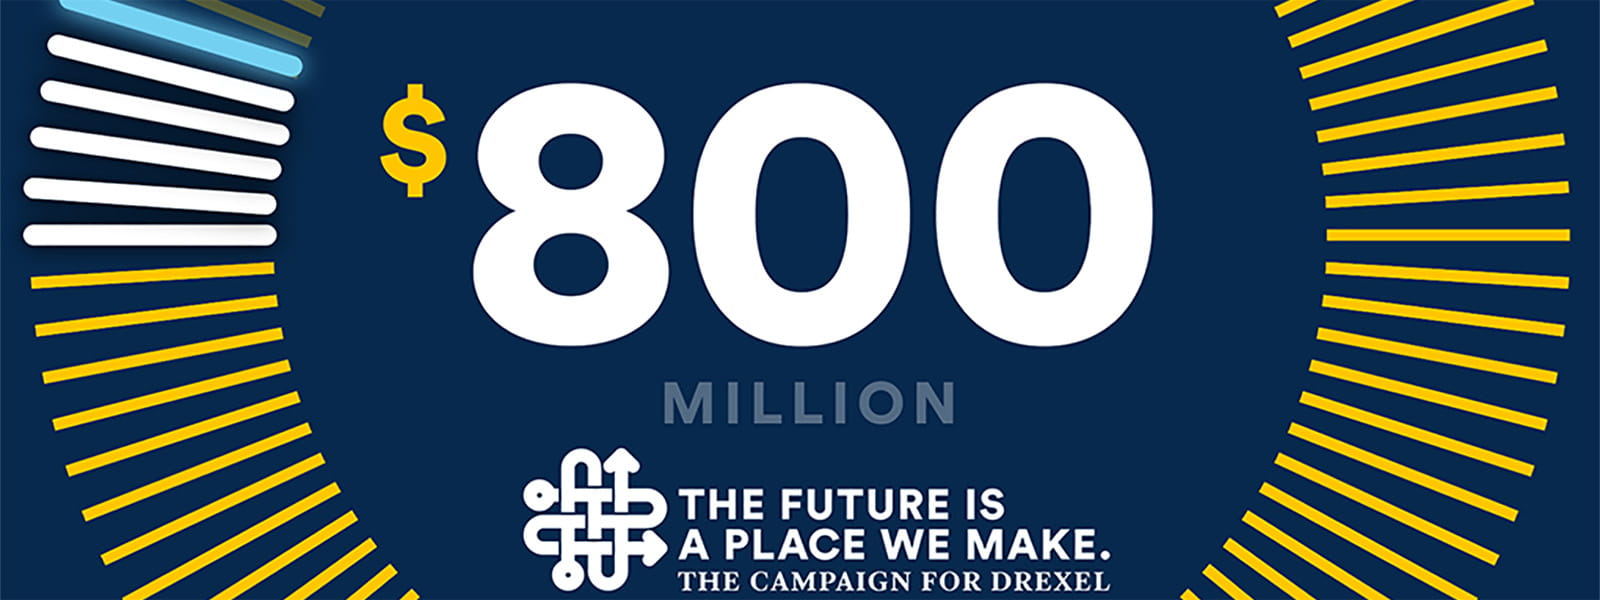 The text reads "$800 Million: The Future Is A Place We Make: The Campaign for 